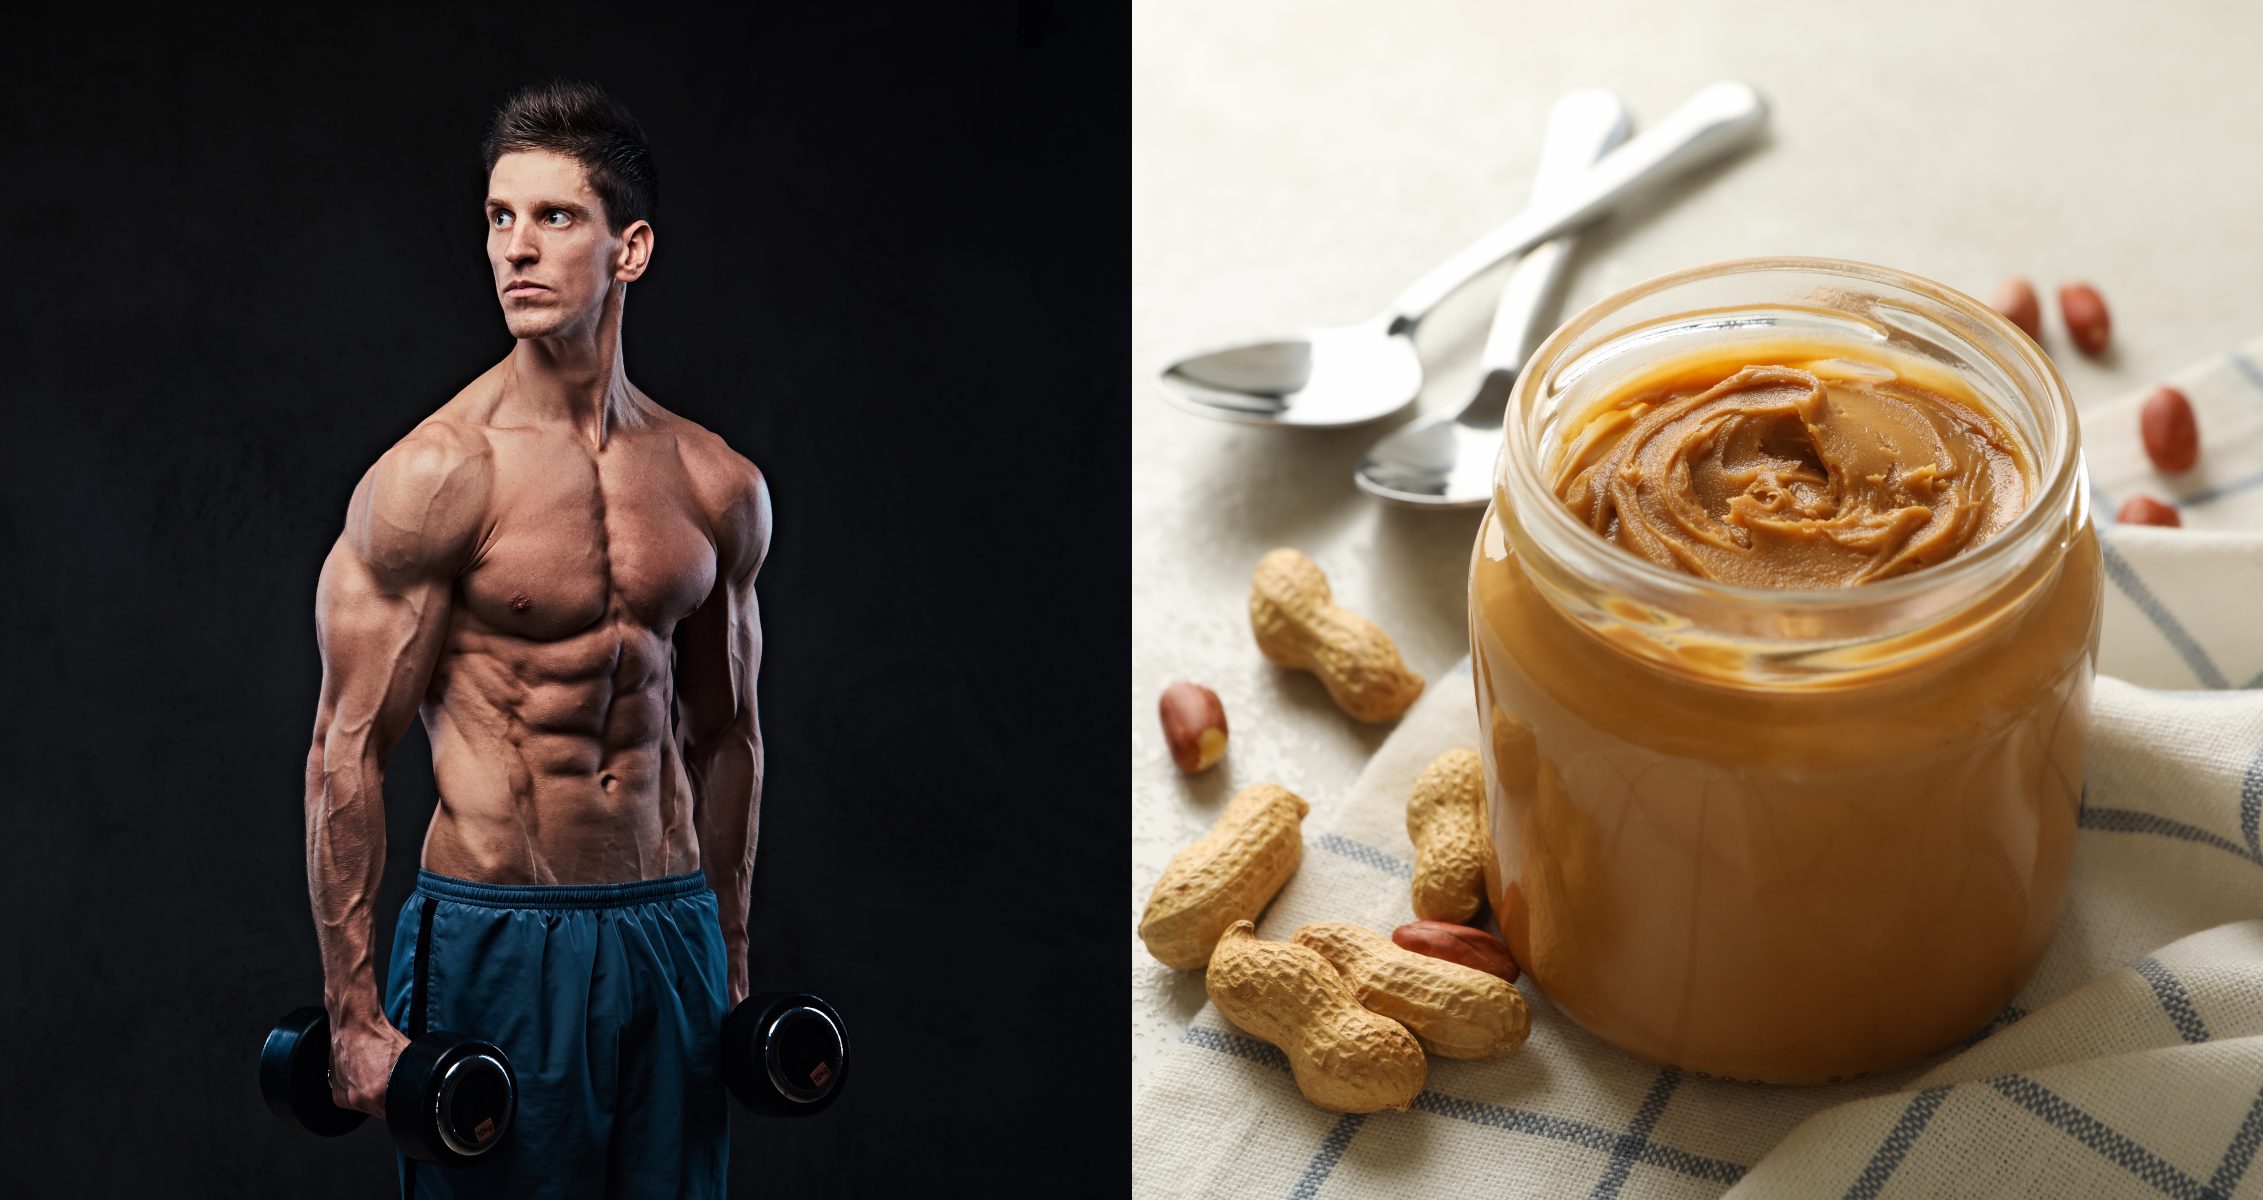 BODY BUILDER REVIEWS PROTEIN PEANUT BUTTER! Condensed Milk Flavored! From Dr.  PEANUT! 